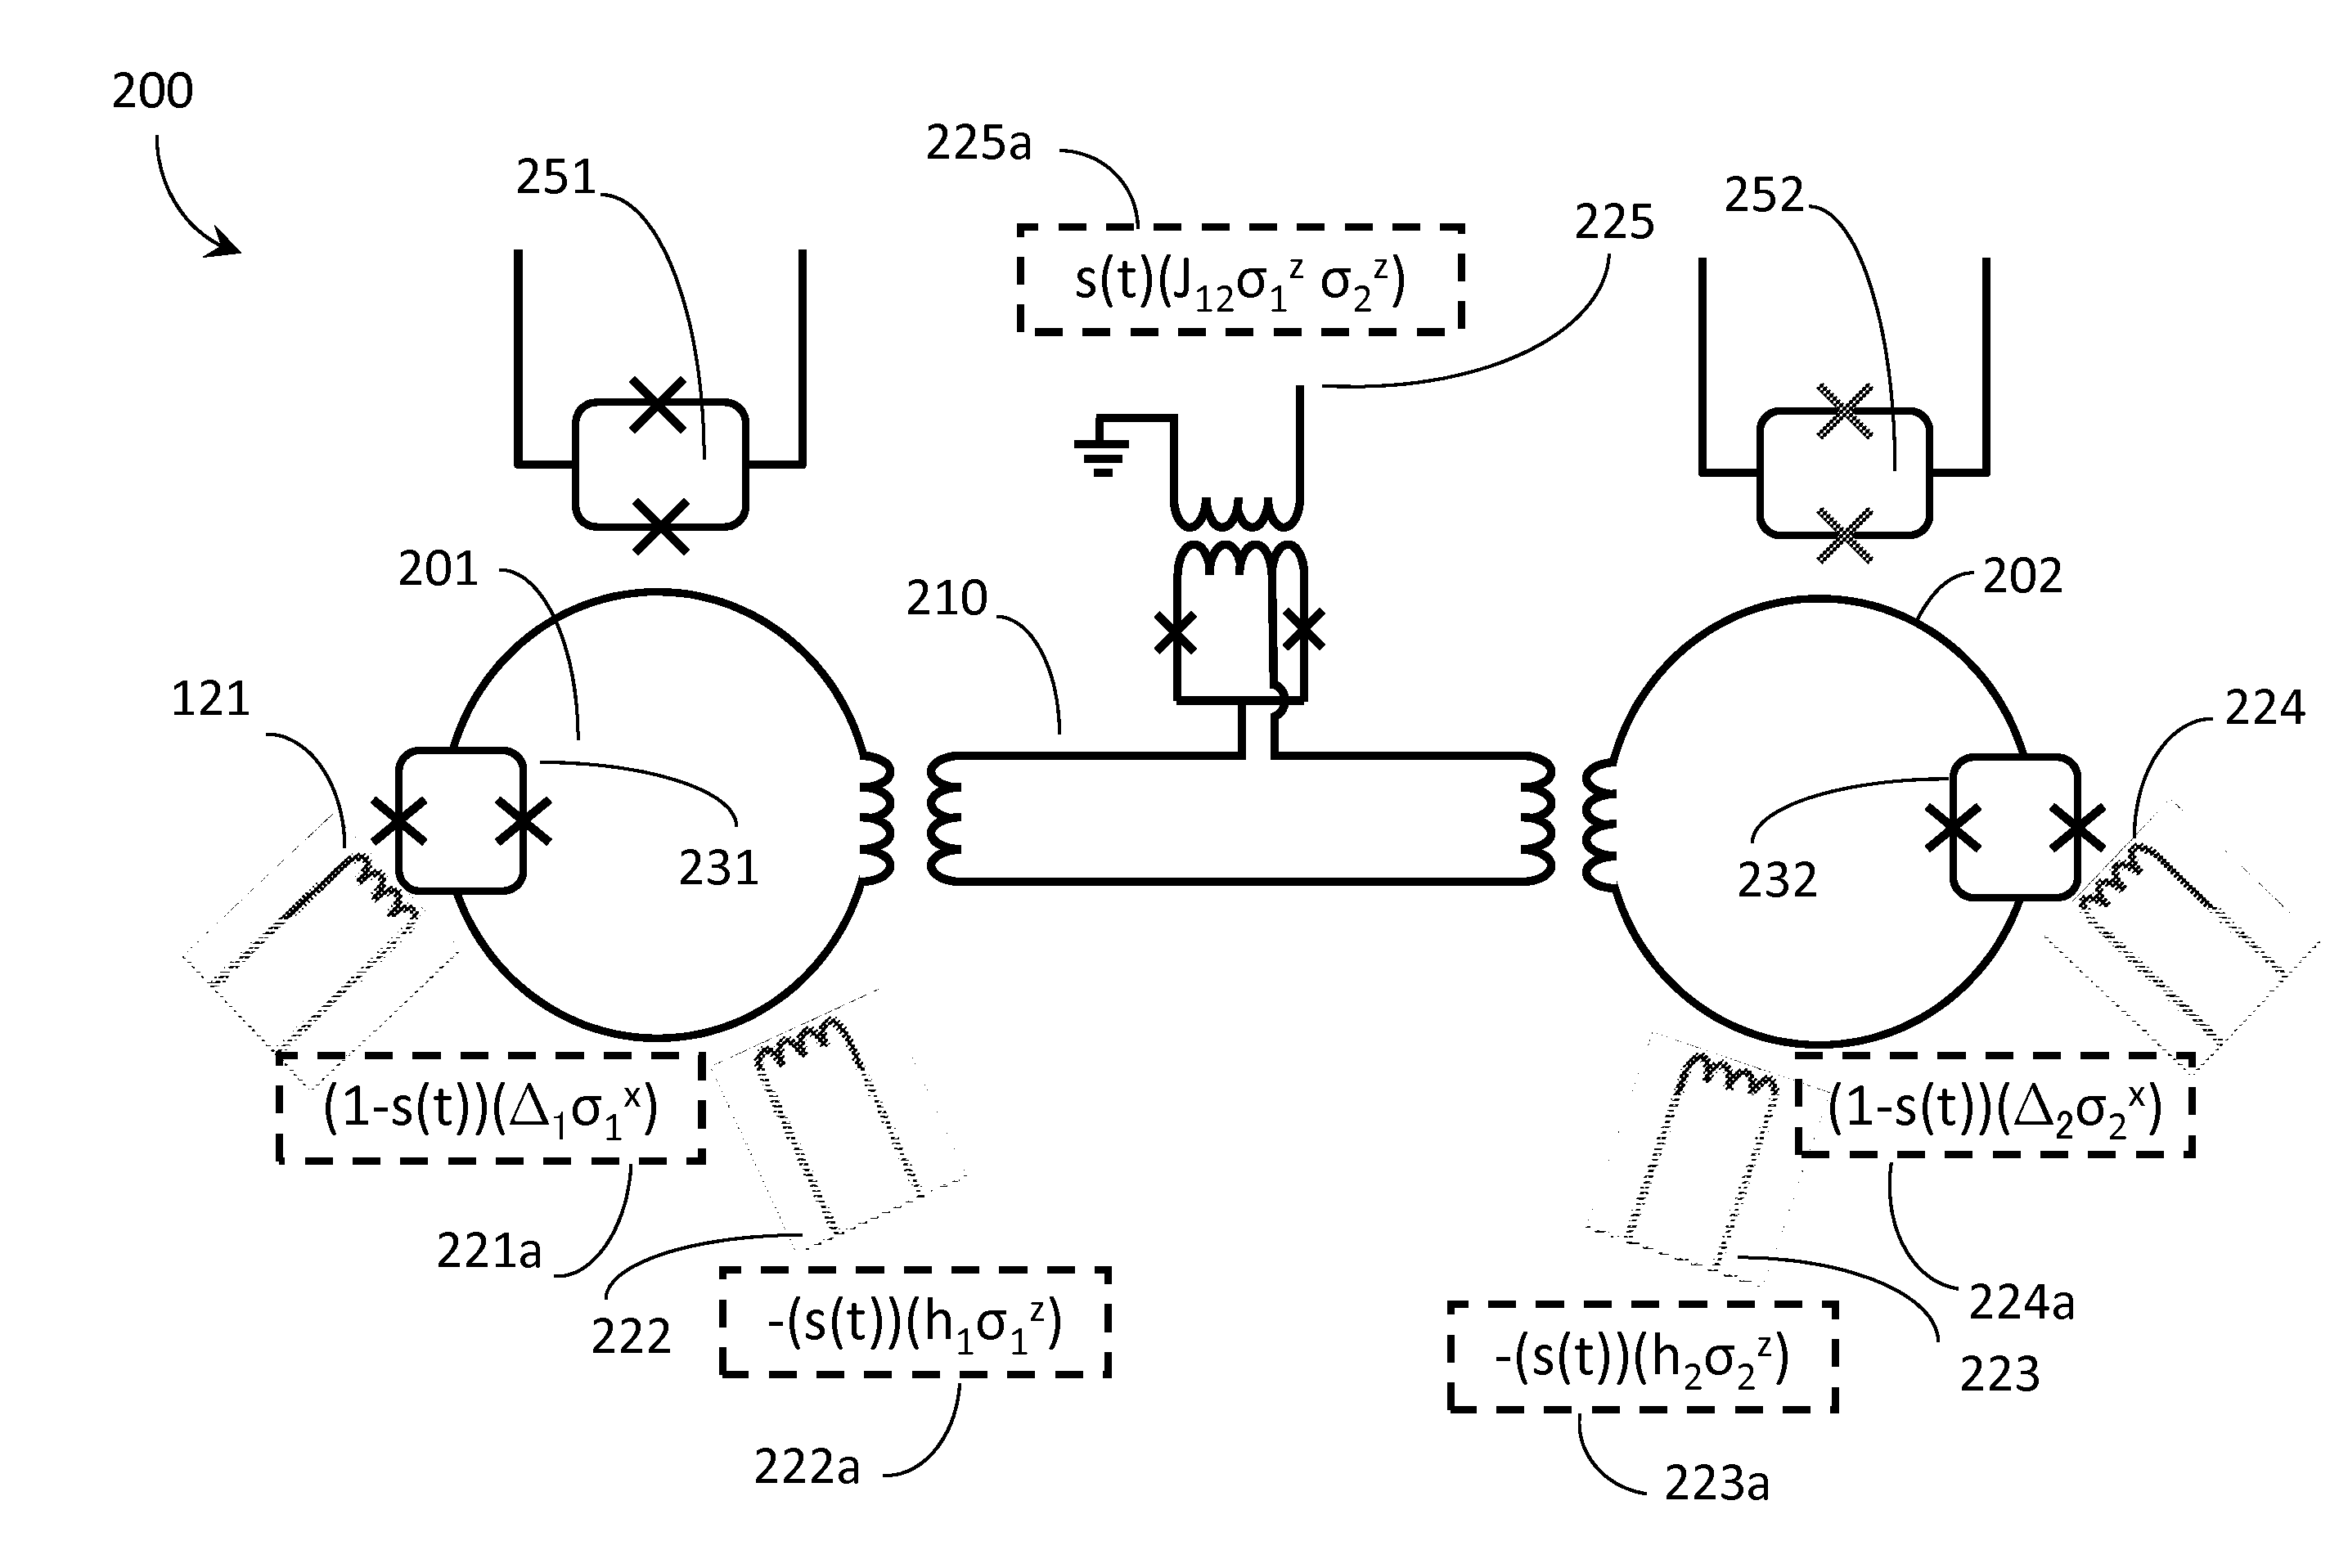 Systems and methods employing new evolution schedules in an analog computer with applications to determining isomorphic graphs and post-processing solutions